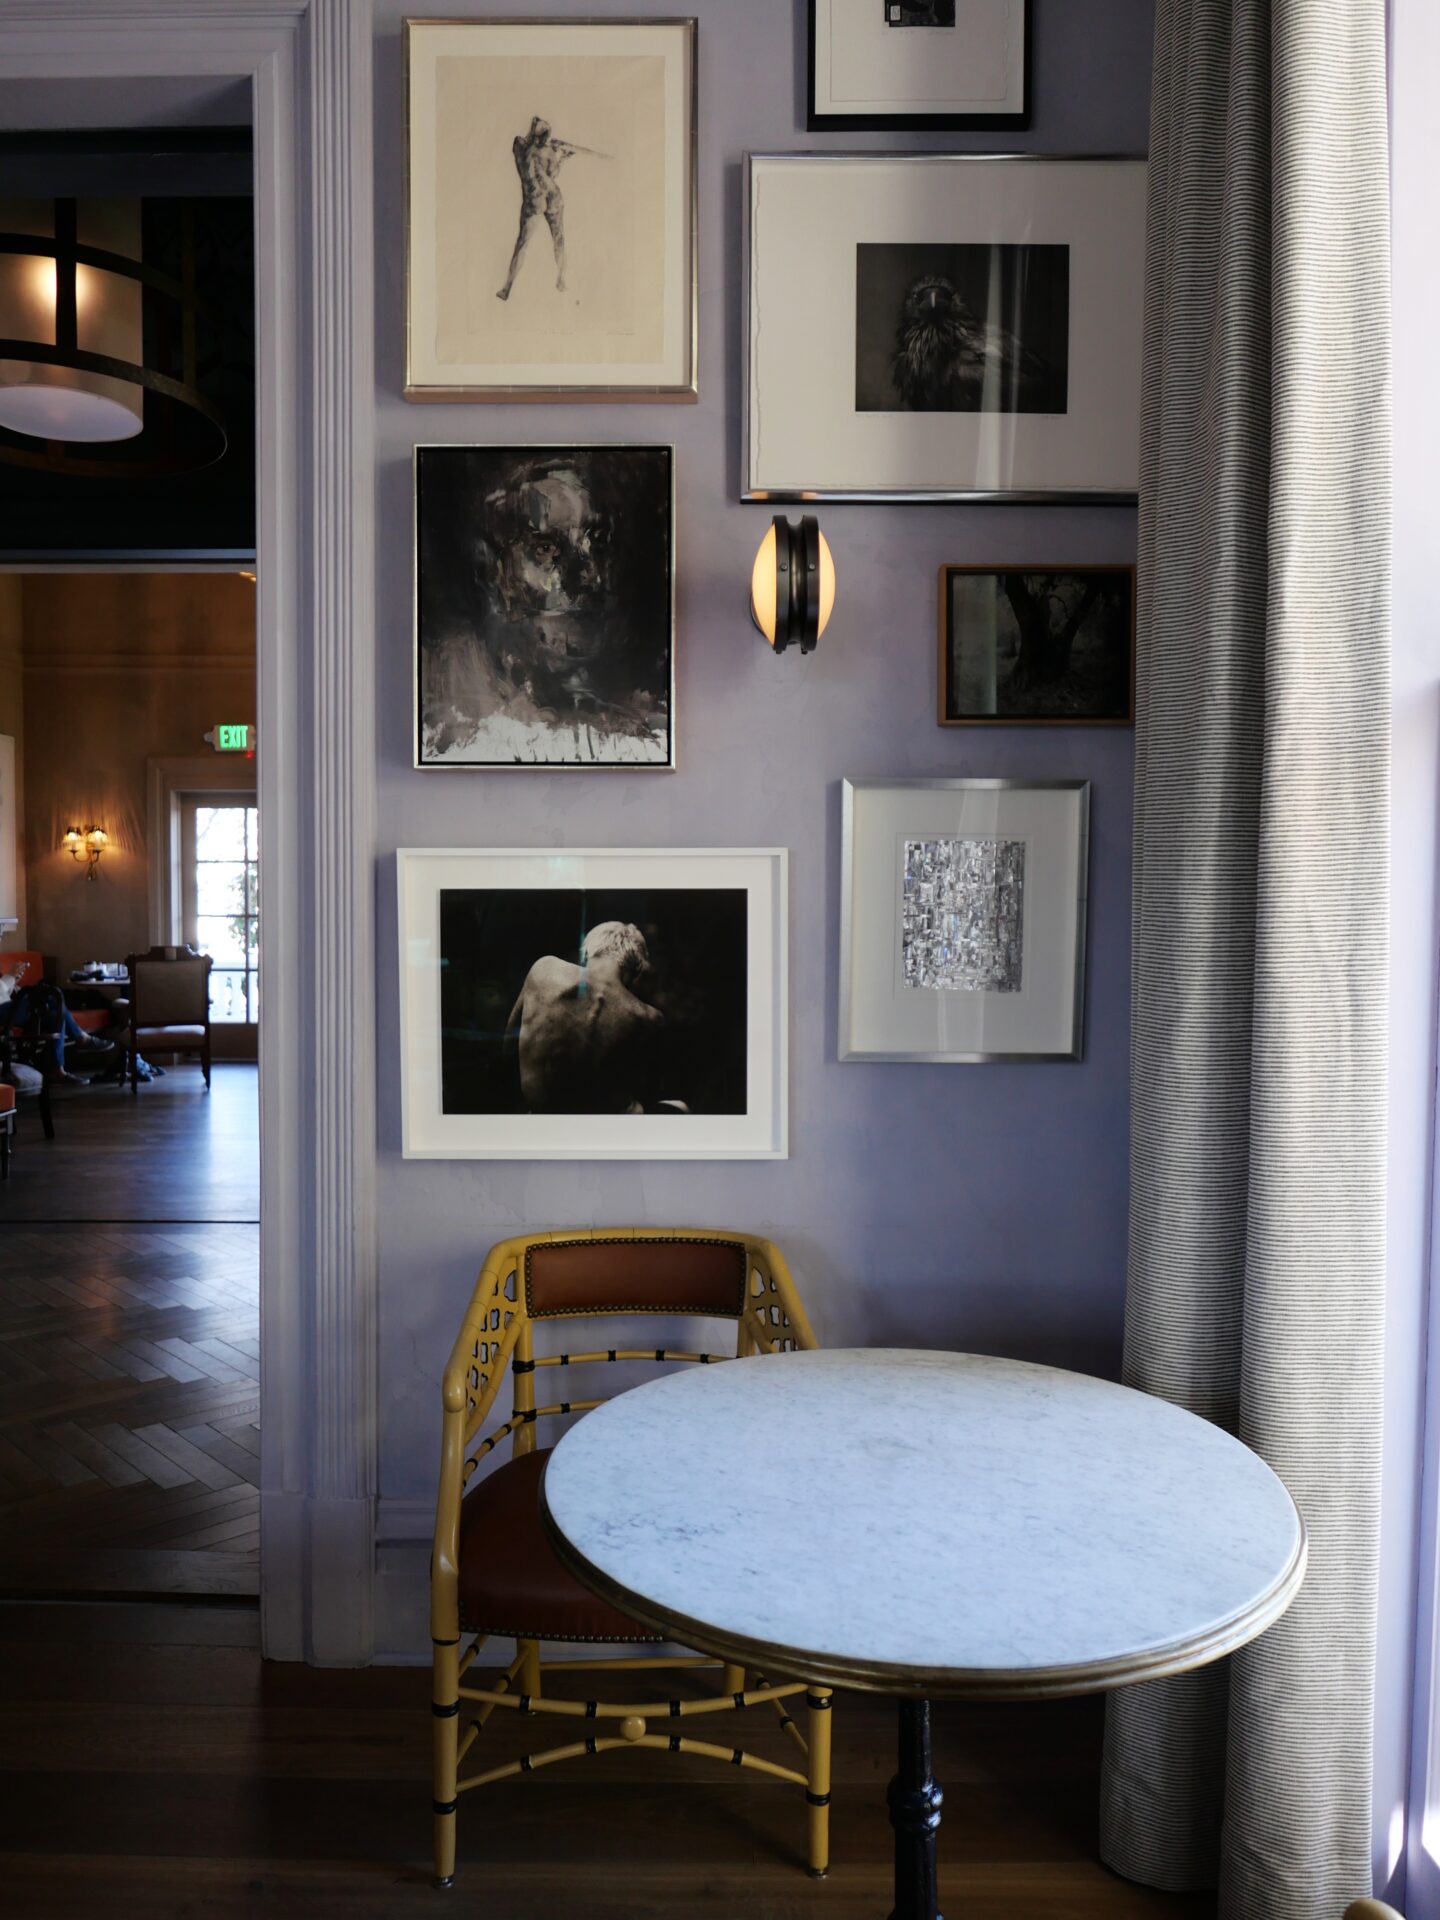 The lounge area at The Madrona Inn is a cozy and inviting space with art-filled walls.